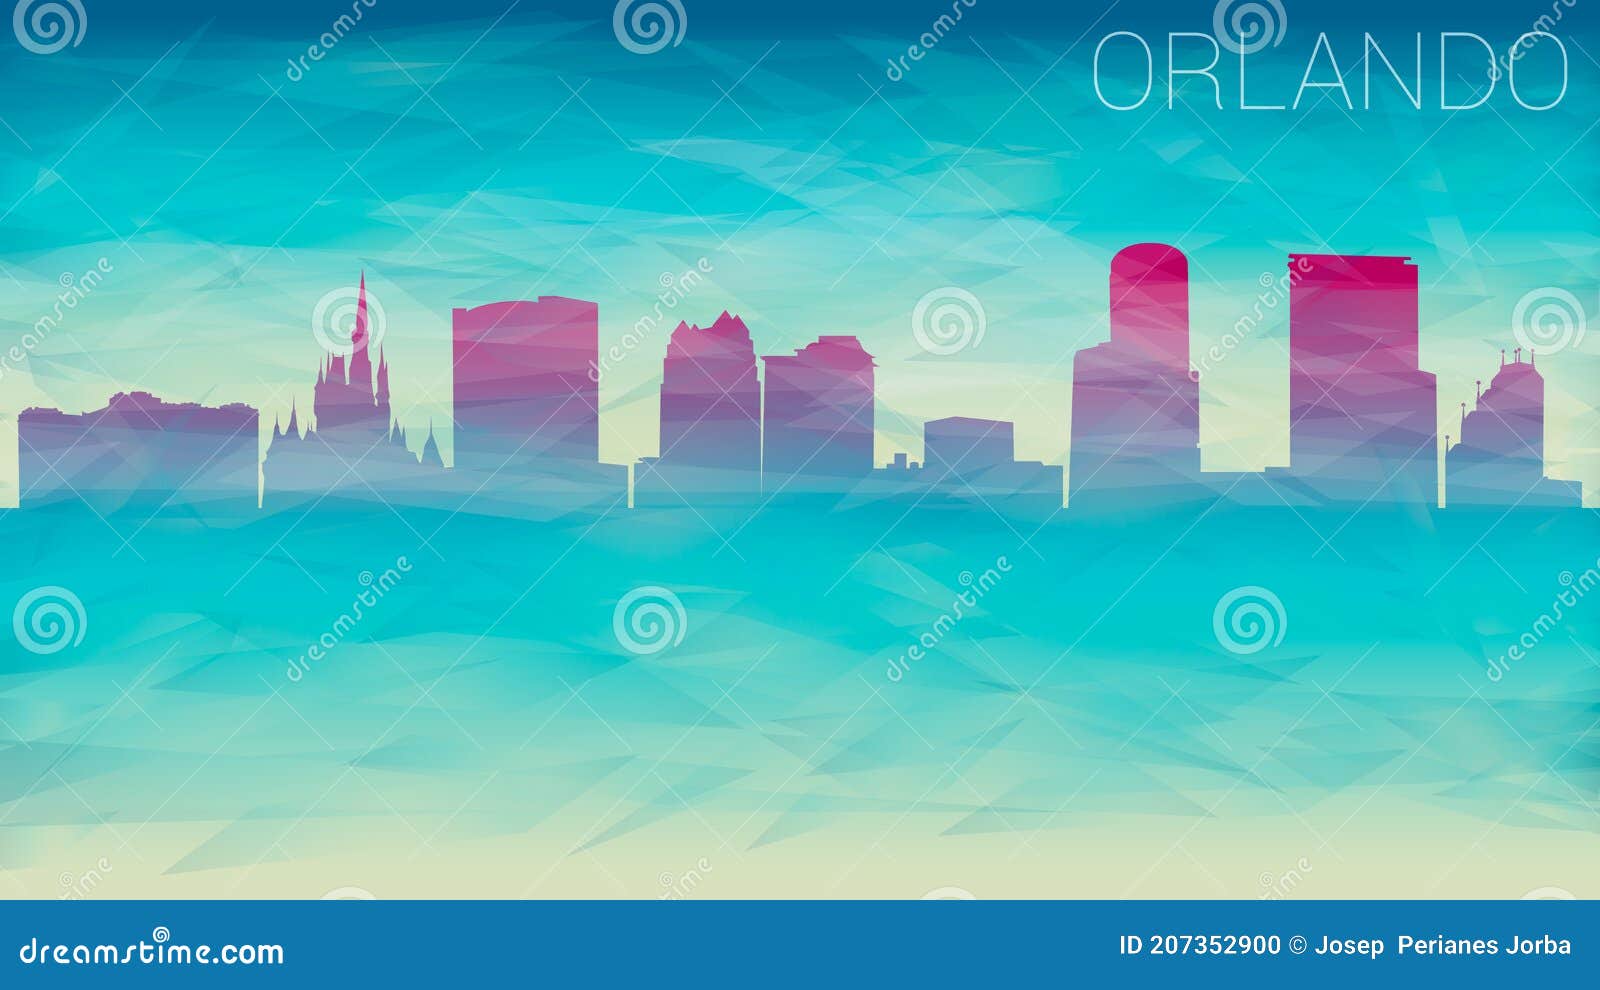 orlando florida city usa silhouette  skyline. broken glass abstract geometric dynamic textured. banner background. colorful